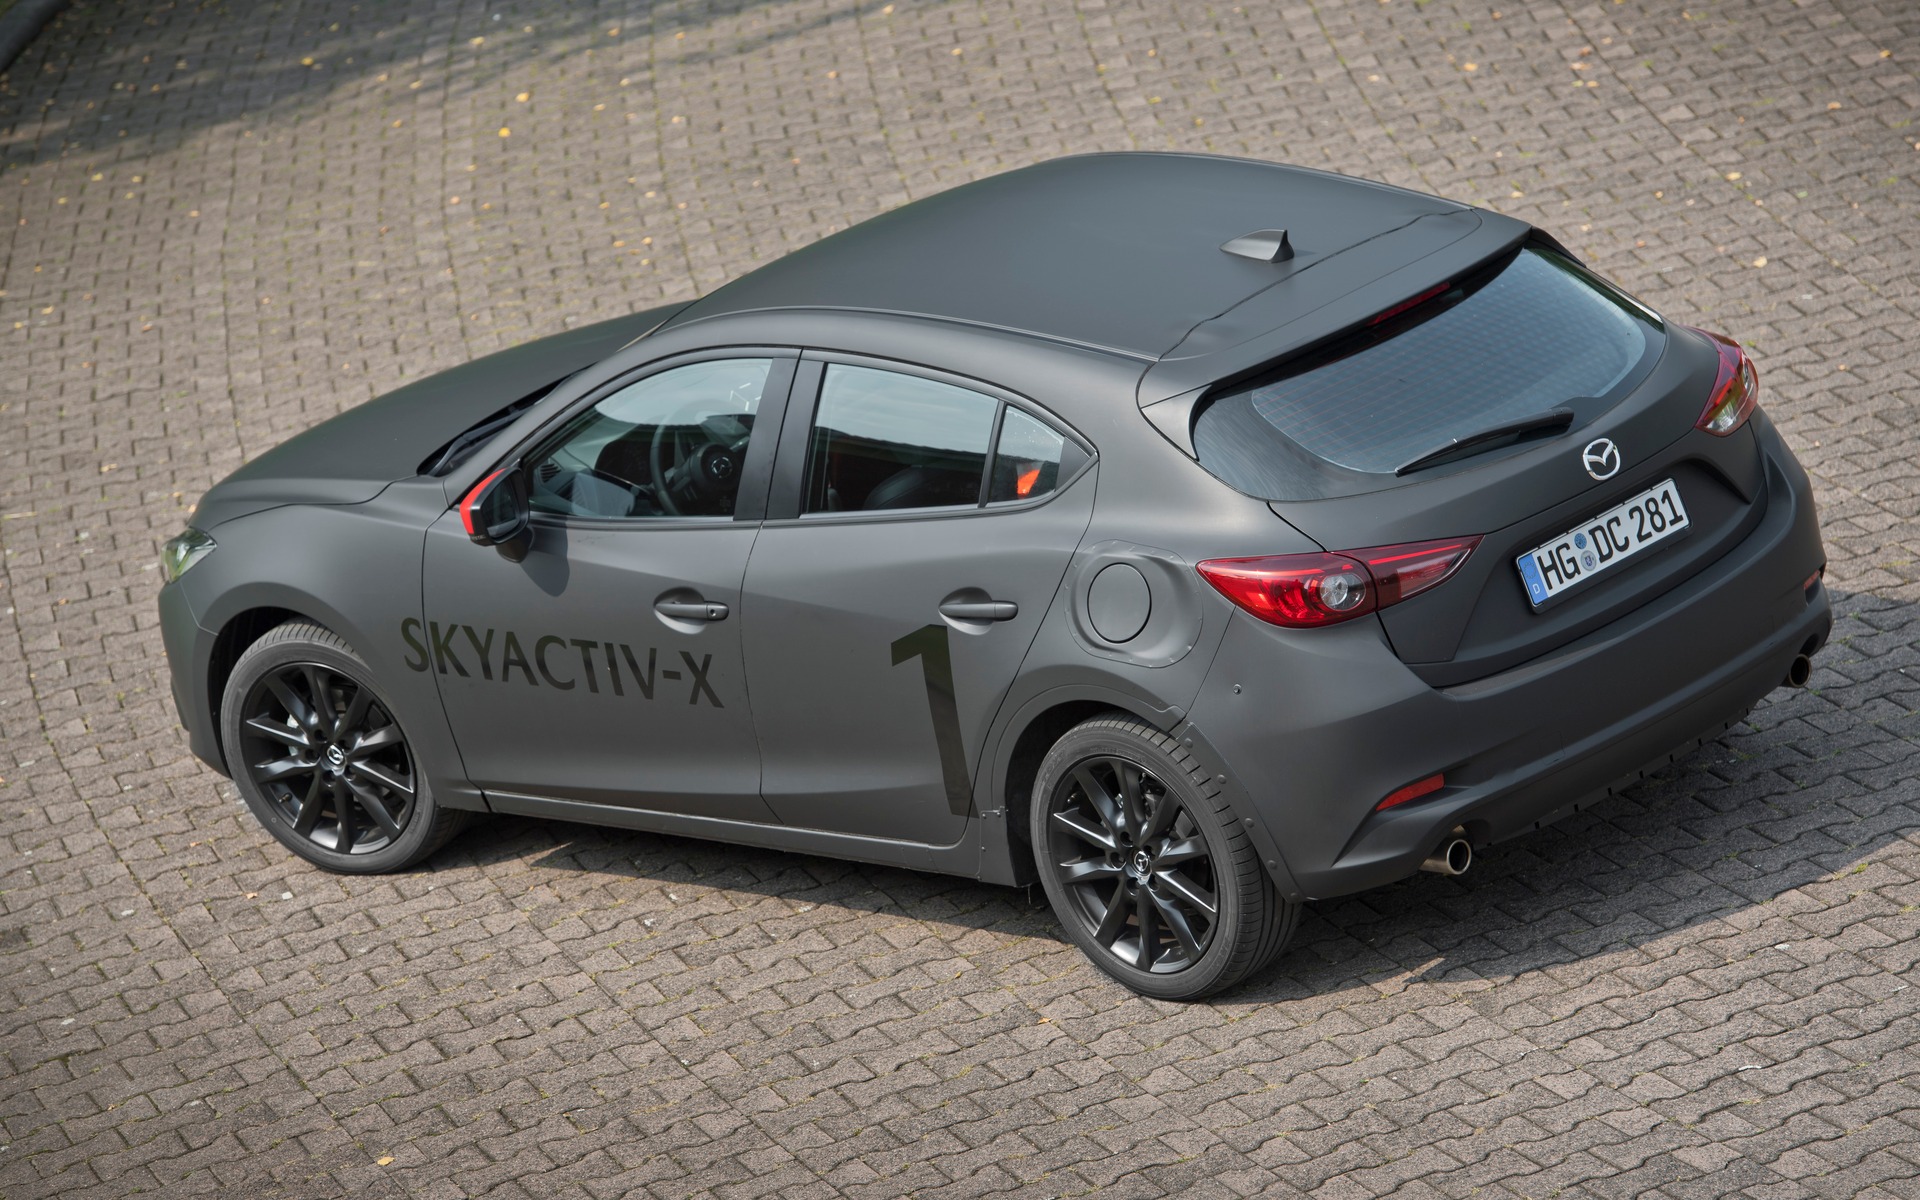 <p>The Mazda3 Sport prototype equipped with the SKYACTIV-X engine.</p>